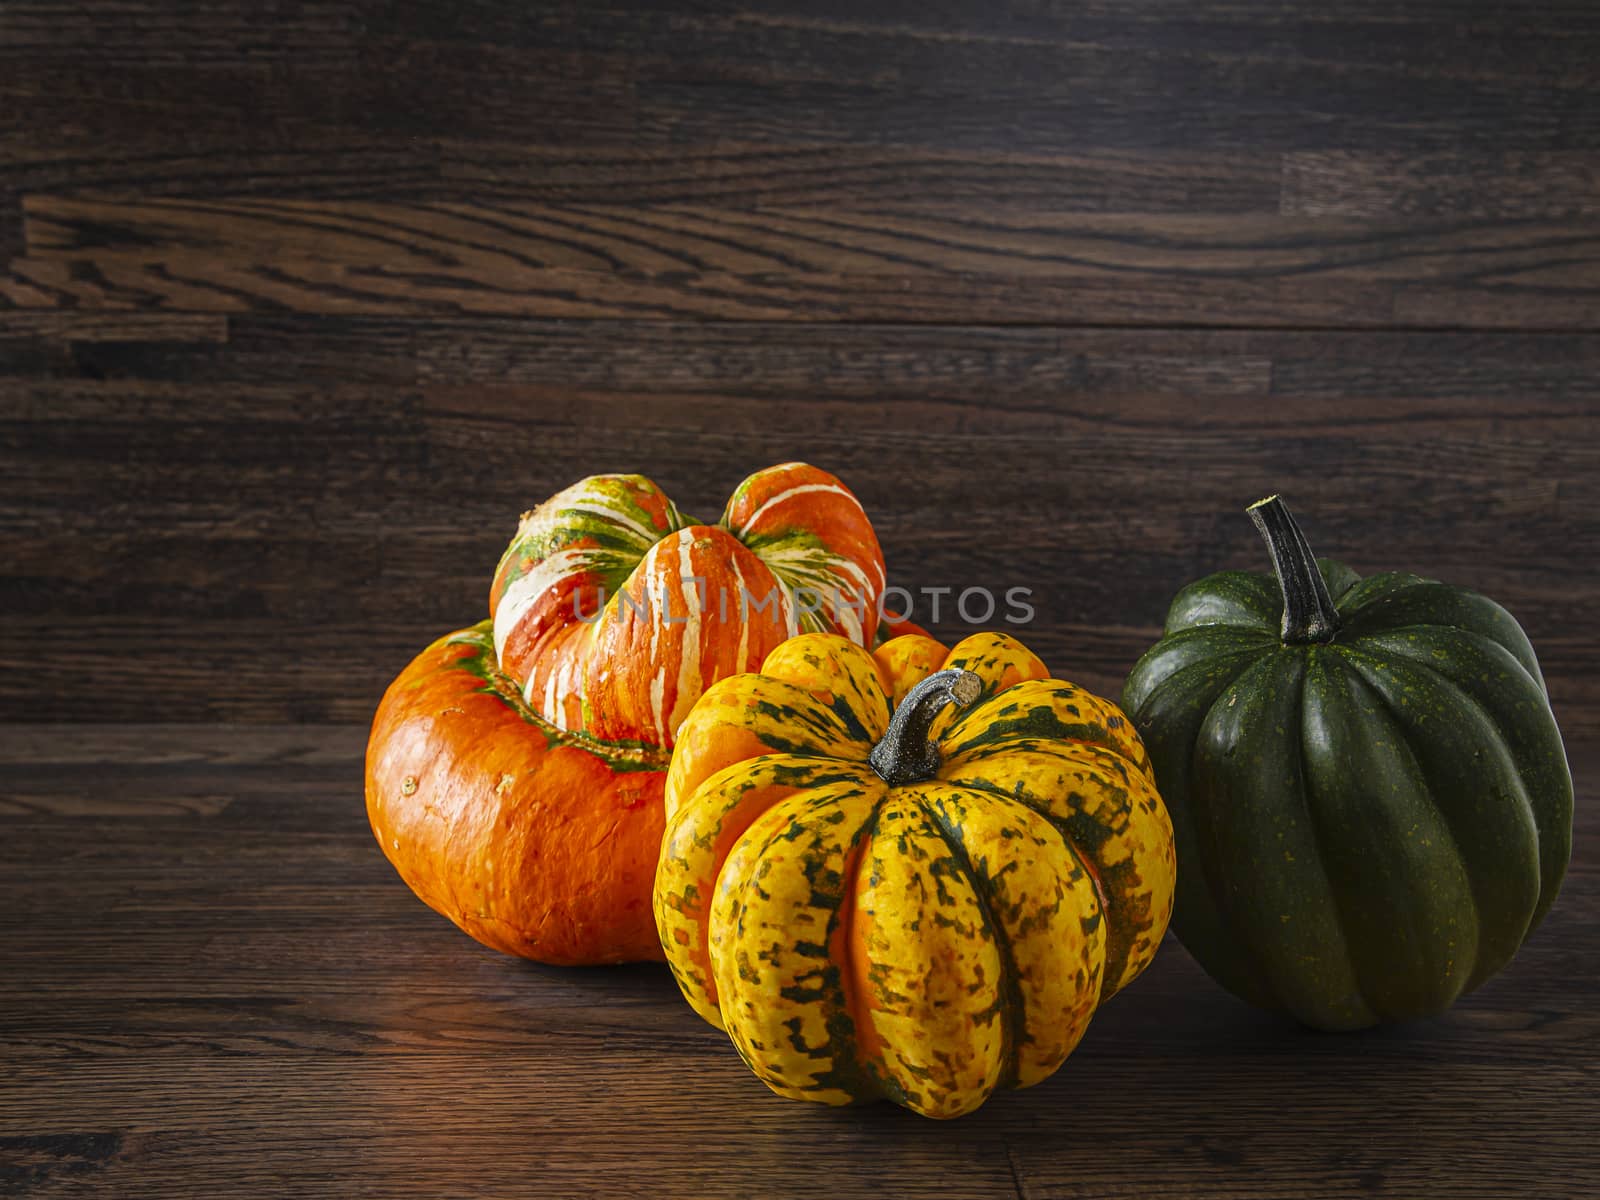 turban squash with yellow and green sweet dumbling squash against a wood background